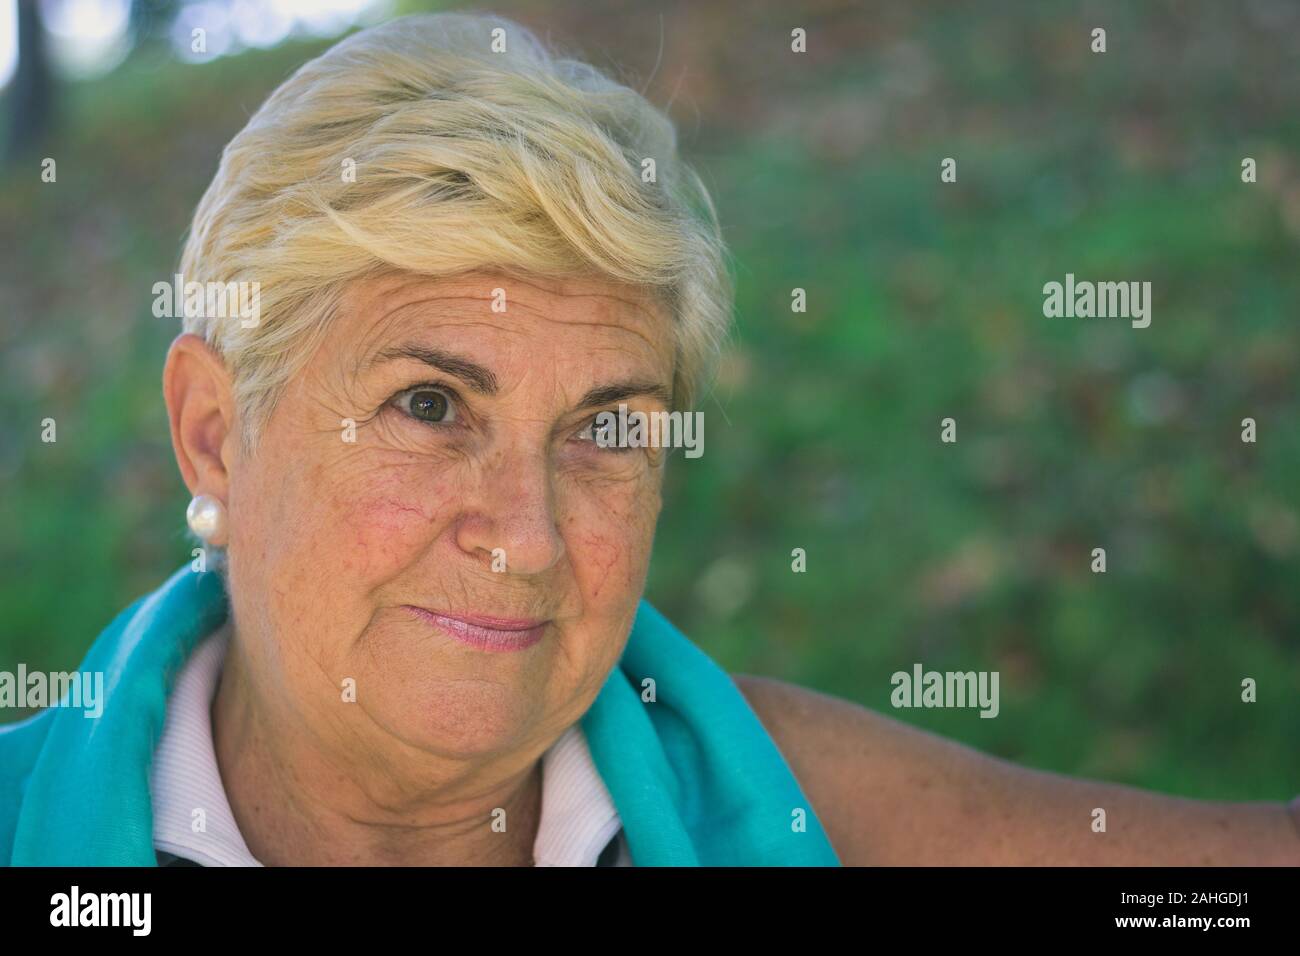 Pensive elder lady portrait in park. Senior blonde woman smiling with optimistic look. Closeup of mature person with sleeveless white shirt Stock Photo